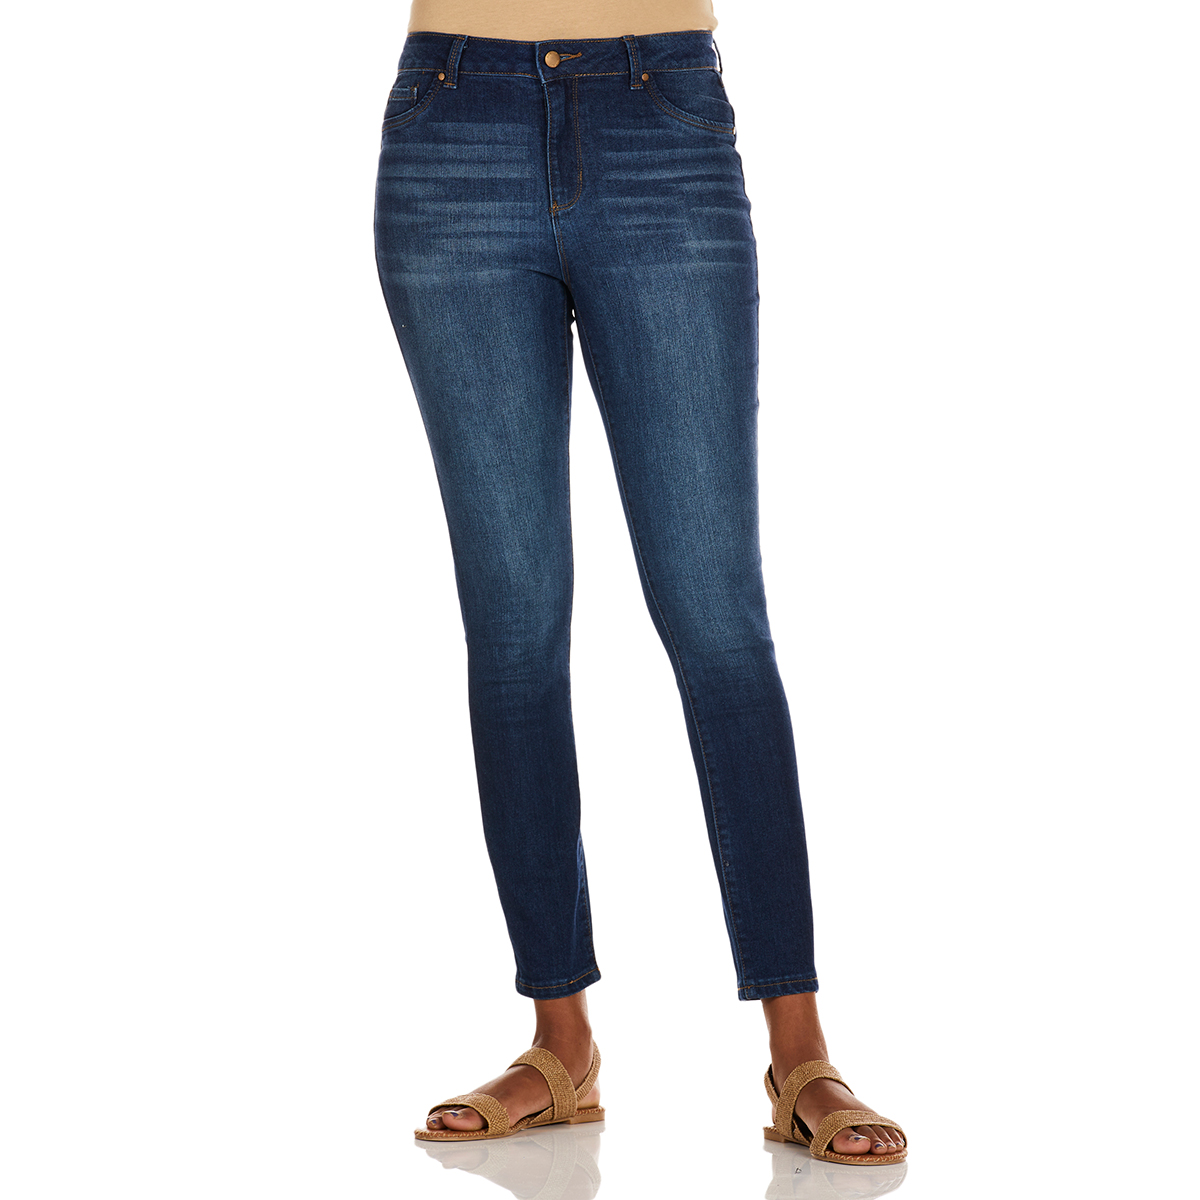 Blue Spice Juniors' High-Waist Recycled Stone Wash Skinny Jeans